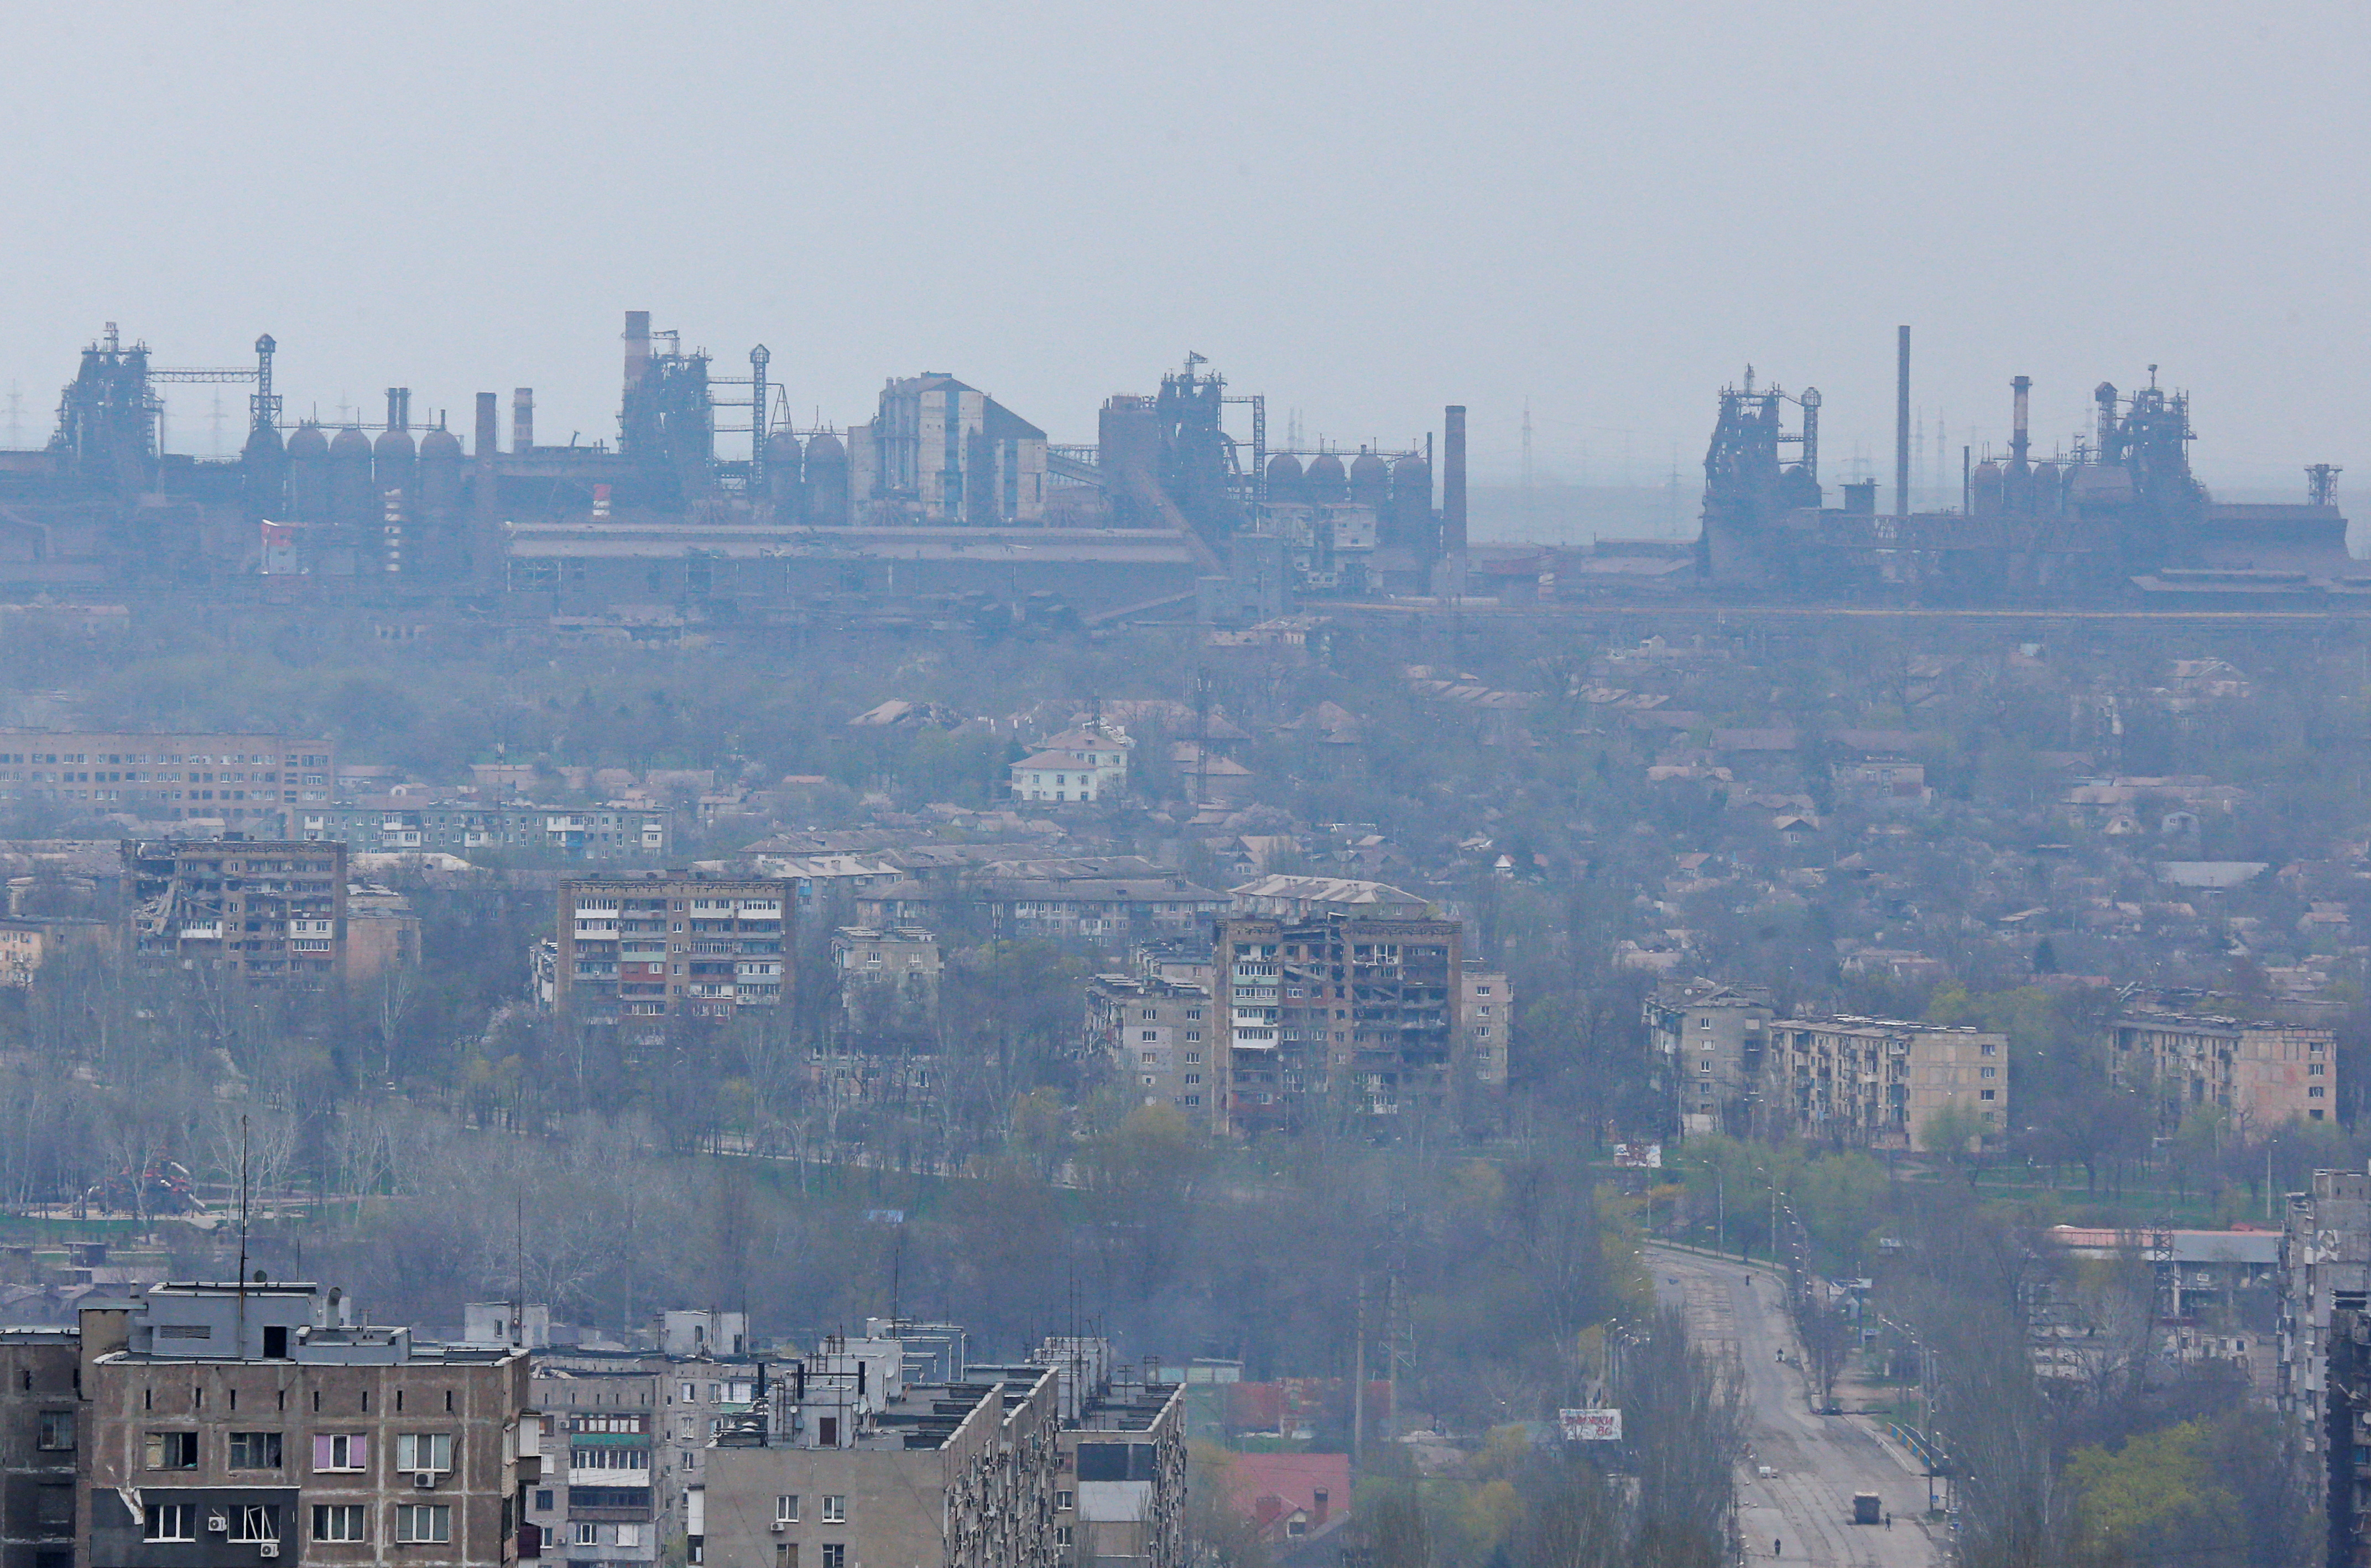 The Azovstal Iron and Steel Works dominates the skyline above ruined apartment buildings in the southern port city of Mariupol, Ukraine, on April 19.